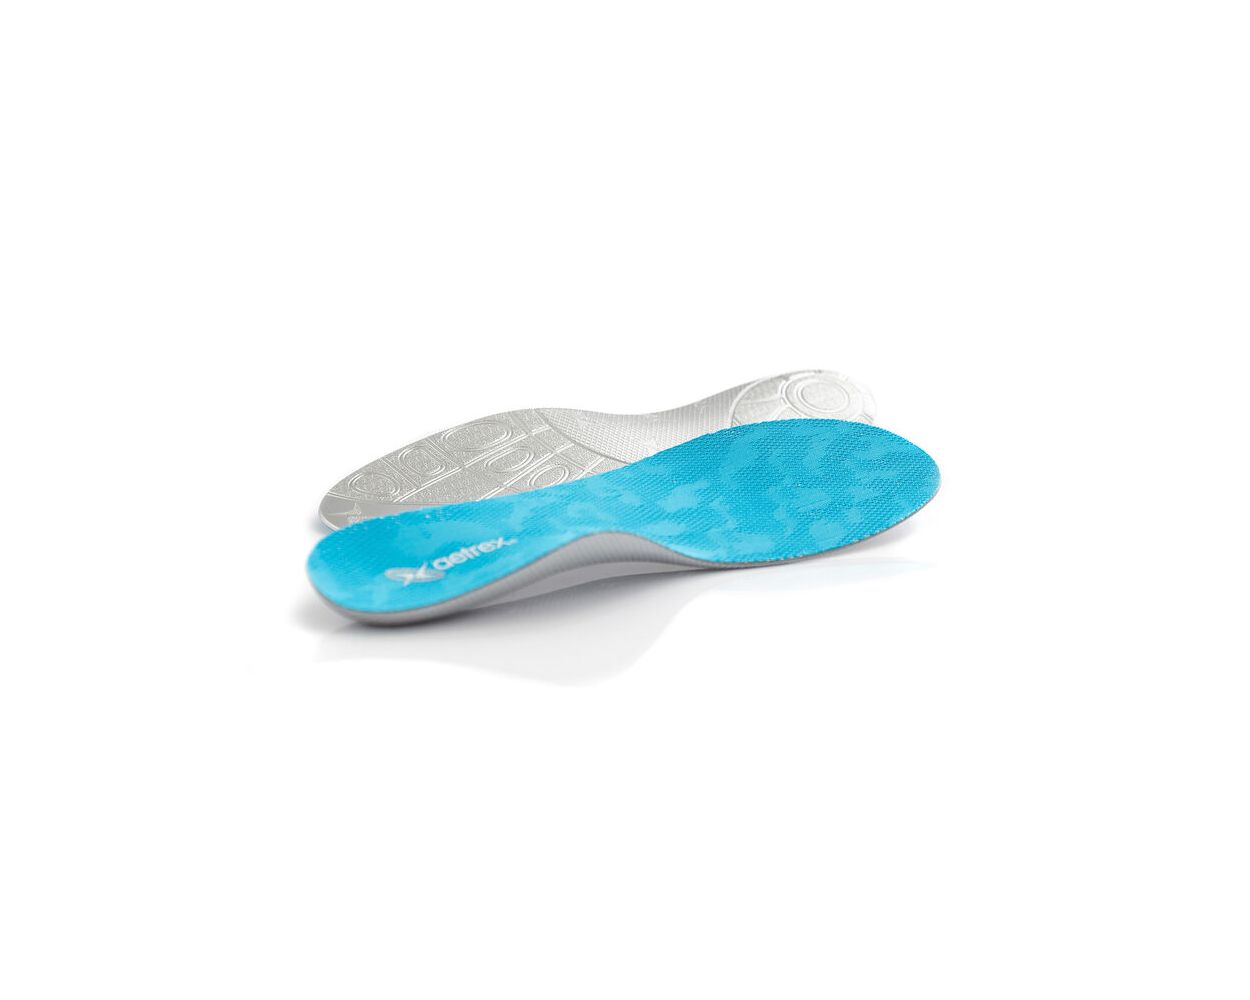 Aetrex Cleat Orthotics Med/High Arches Insoles